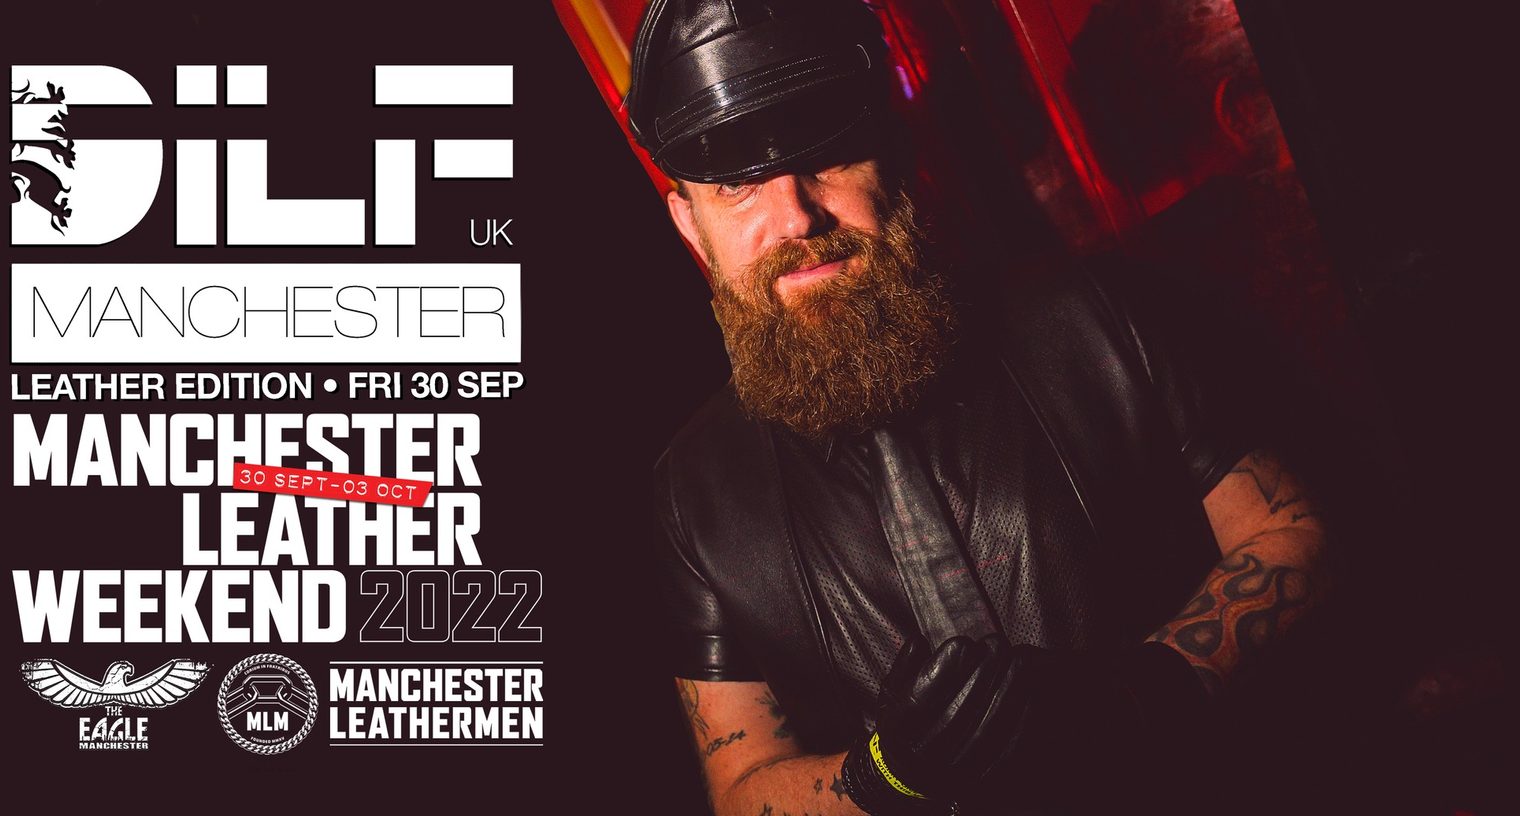 DILF Manchester: Leather Edition